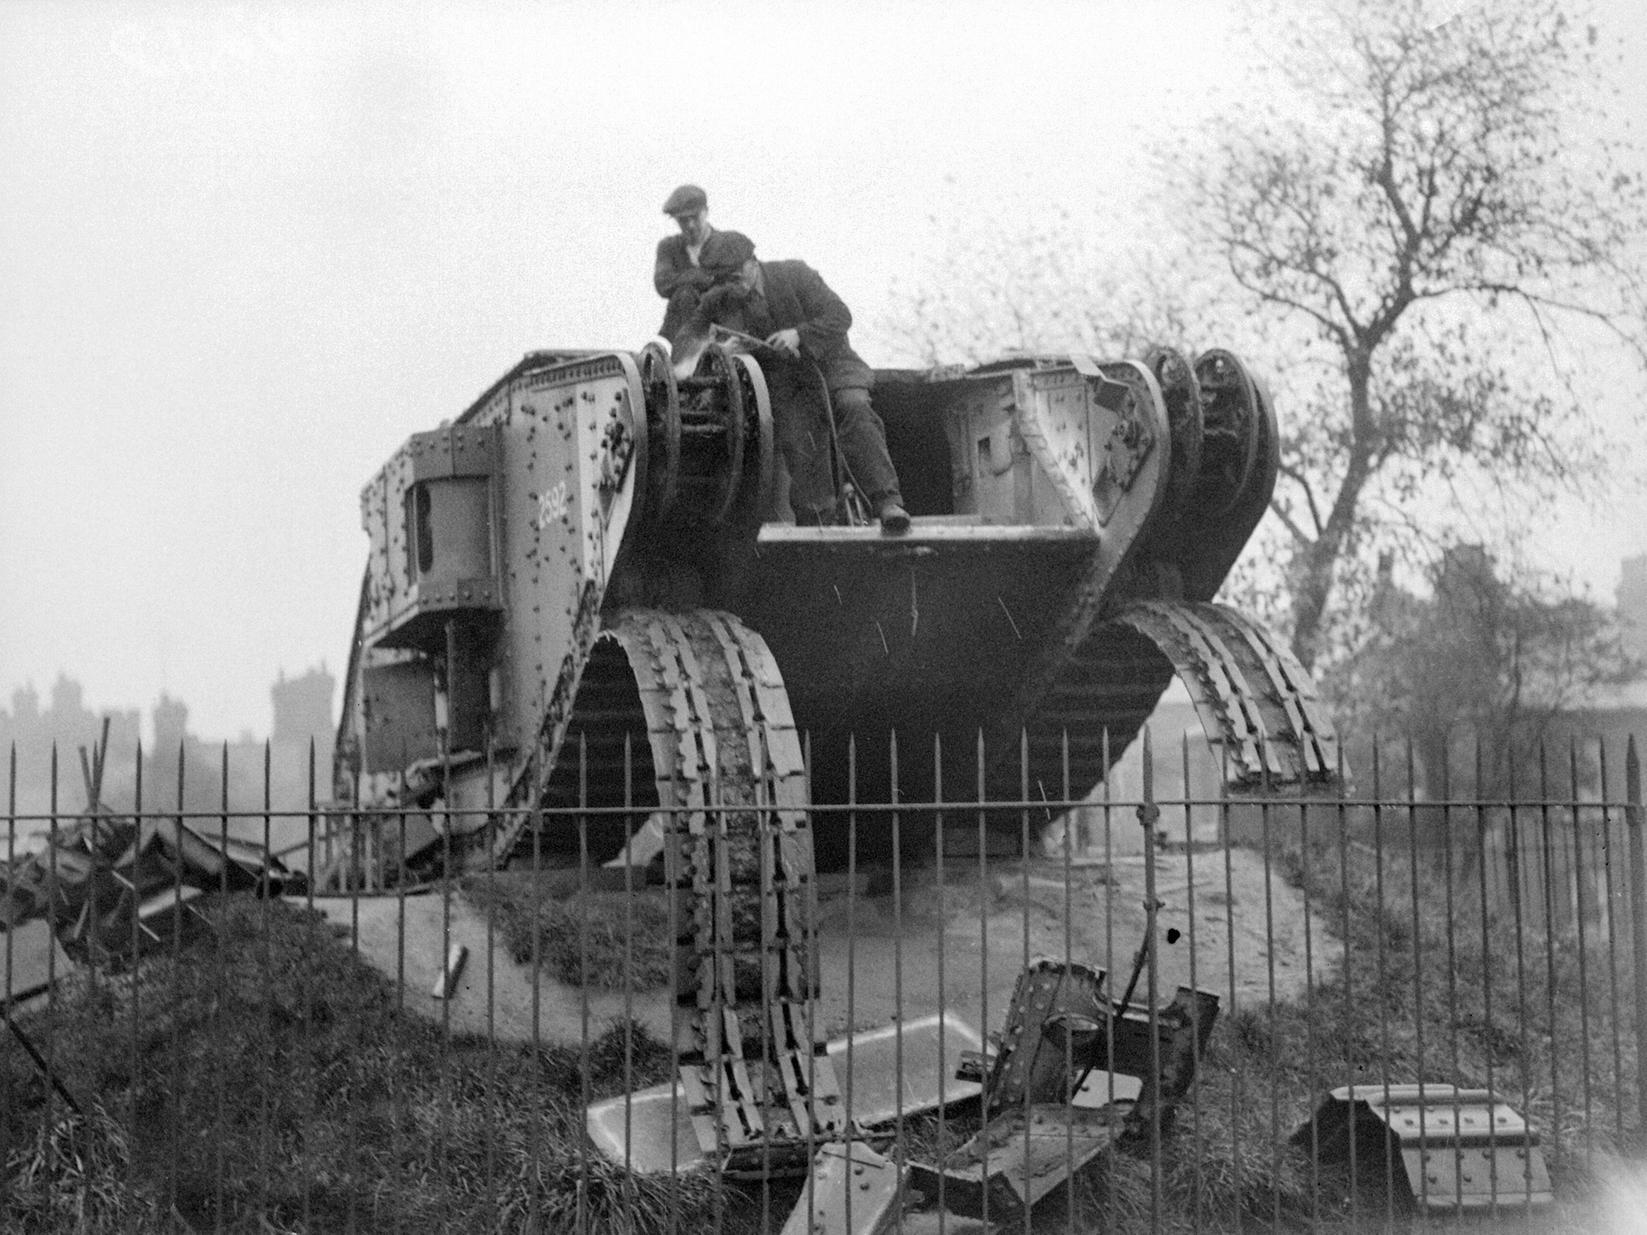 We kick off with this quirky photo. The image shows the demolition of a tank on Woodhouse Moor in the early 1930s.